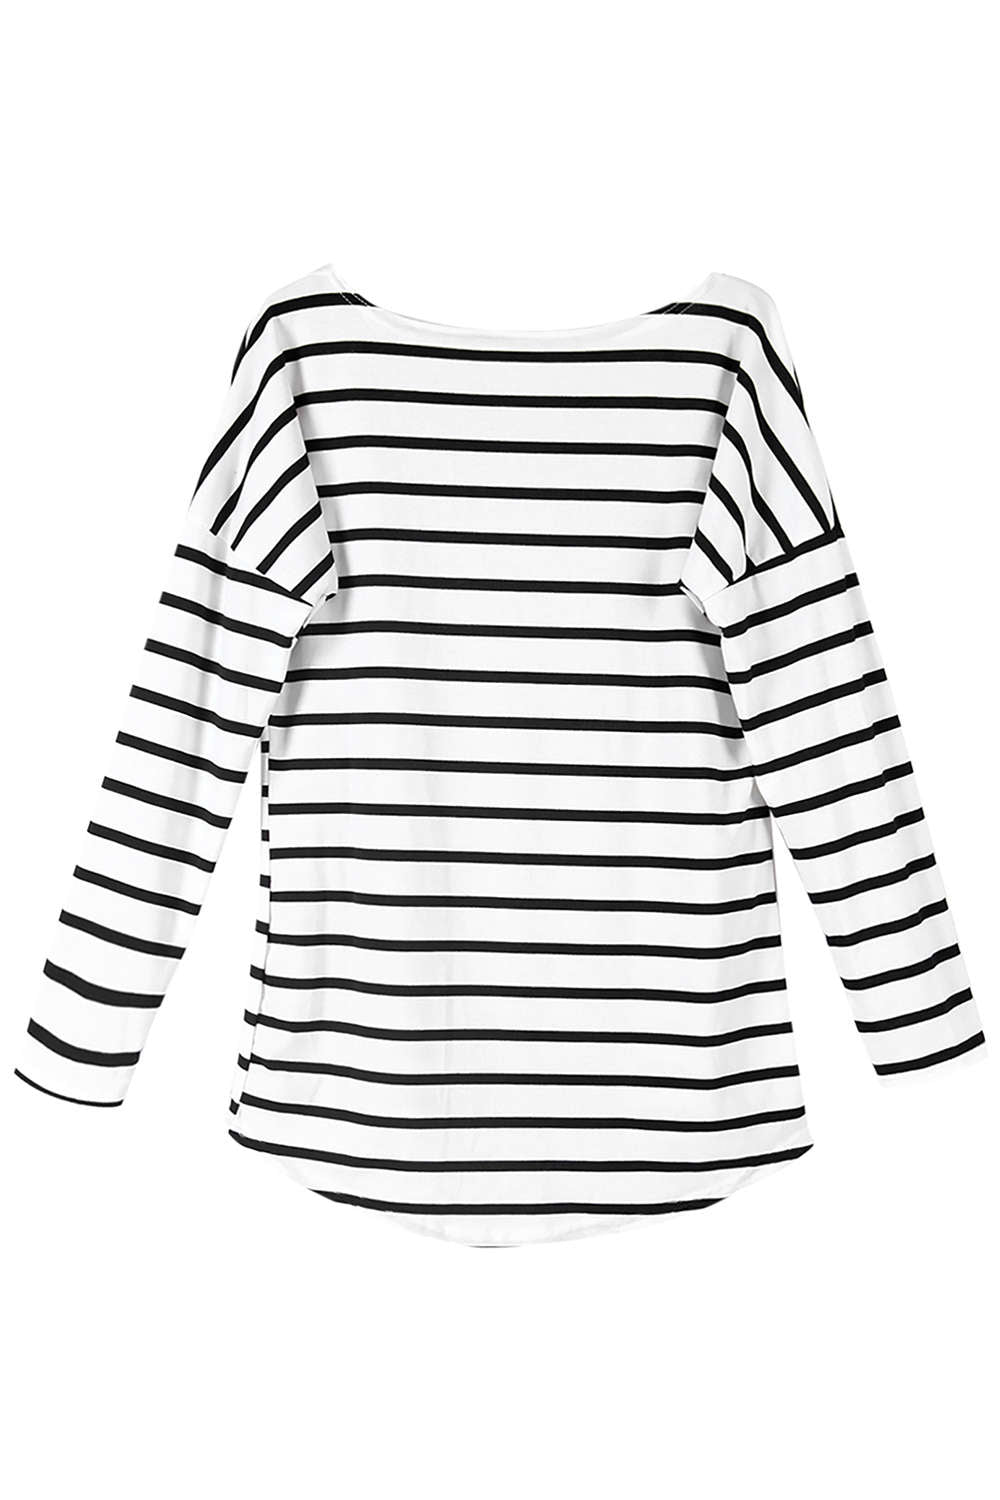 Iyasson Women's Scooped Neckline Striped Casual T-Shirt 